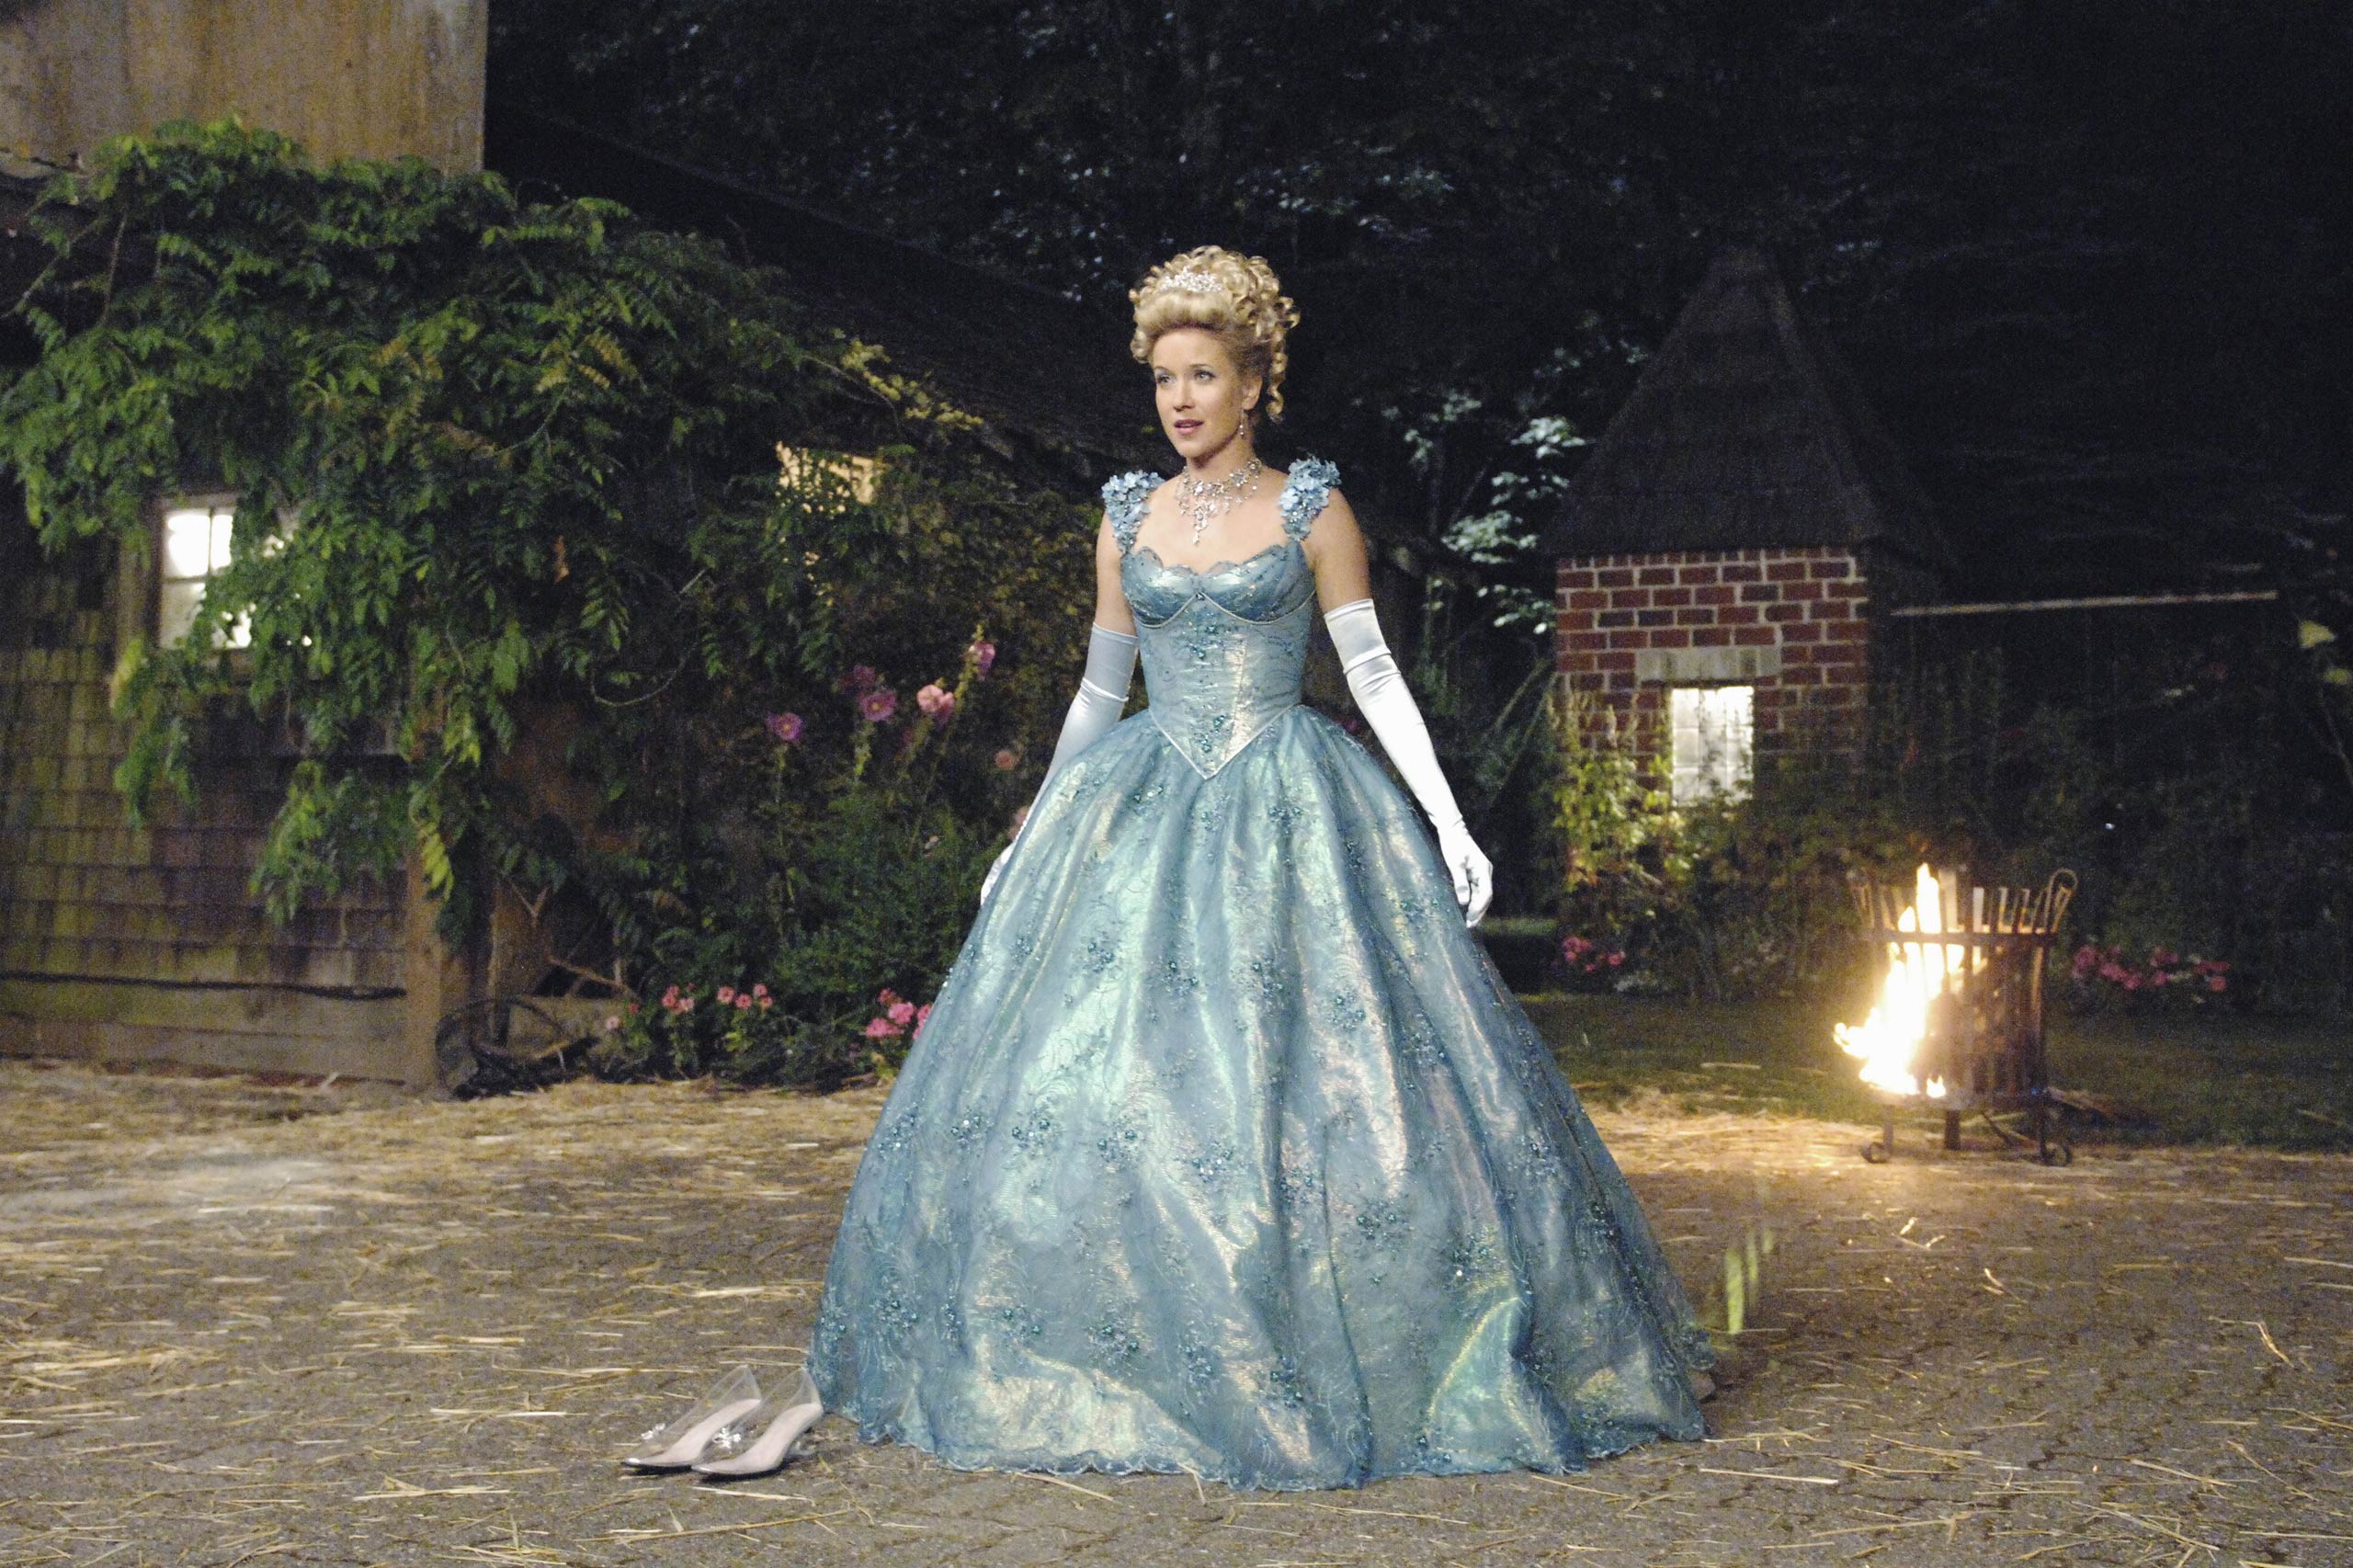 Jessy Schram as Cinderella in ABC's Once Upon a Time, 2011